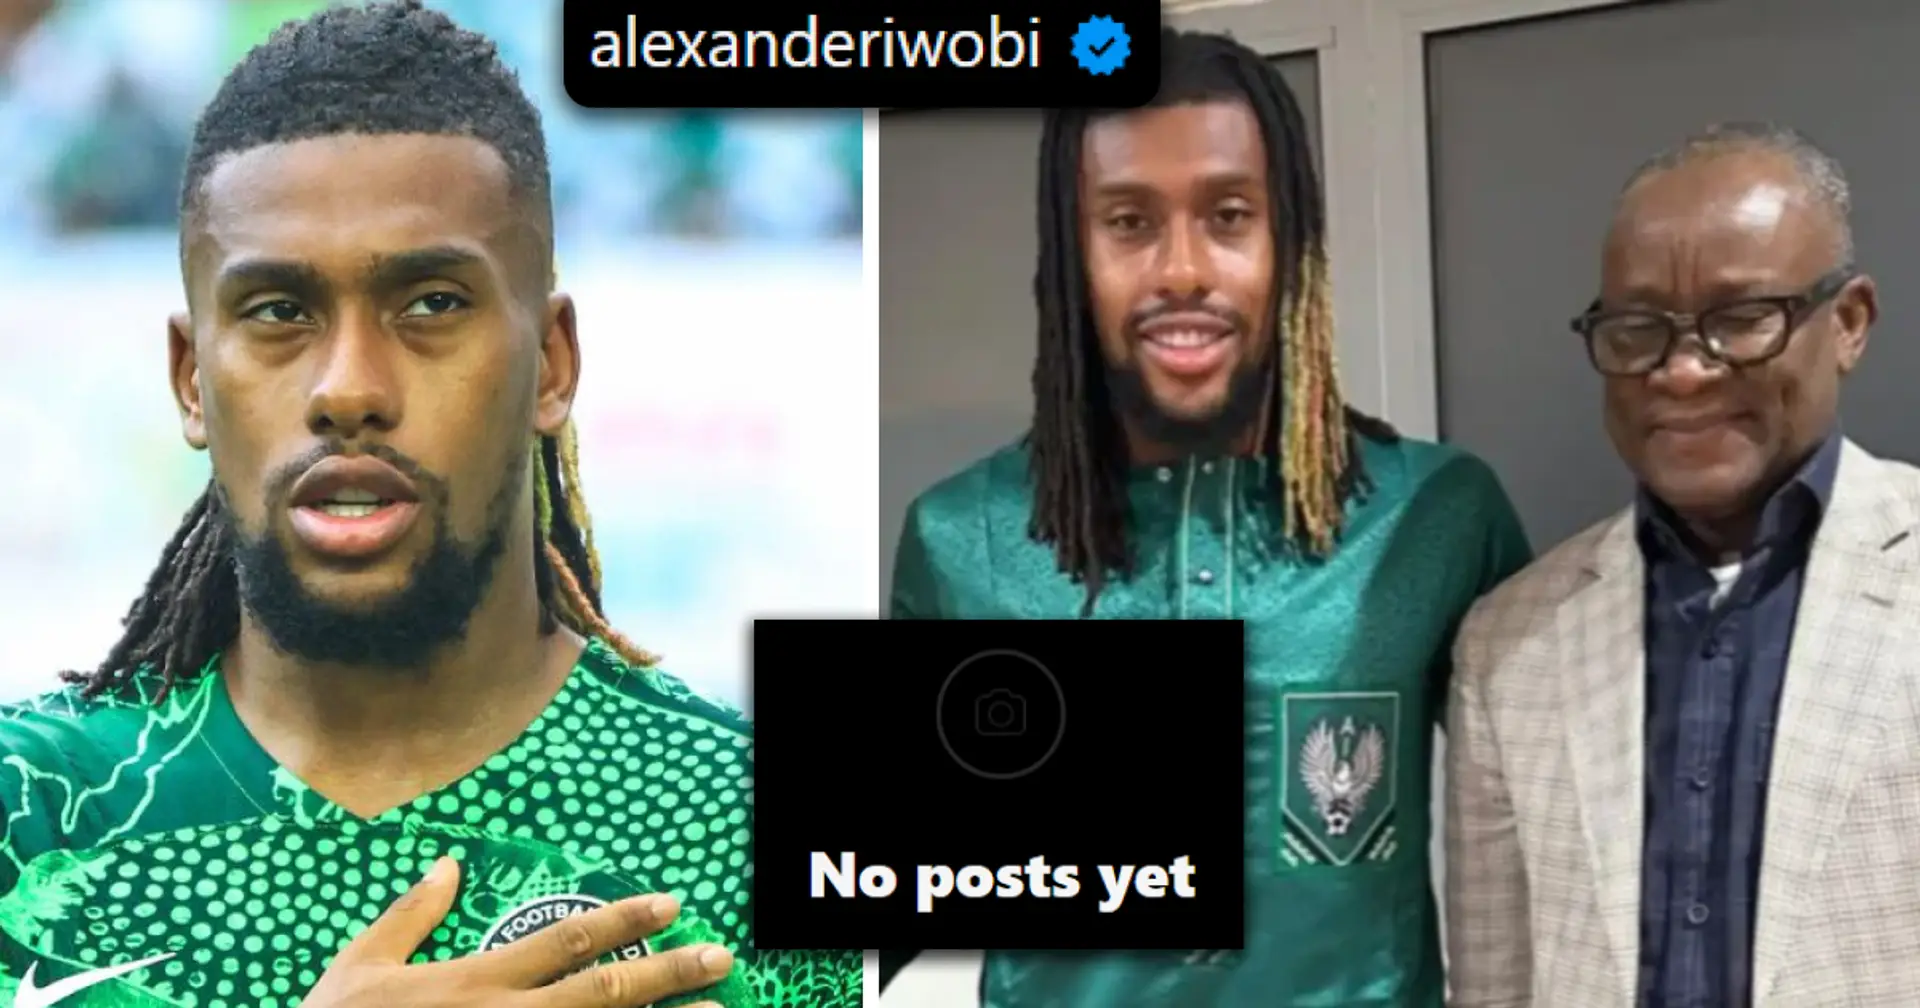 Alexander Iwobi takes himself off social media amid trolls and online abuse after AFCON final